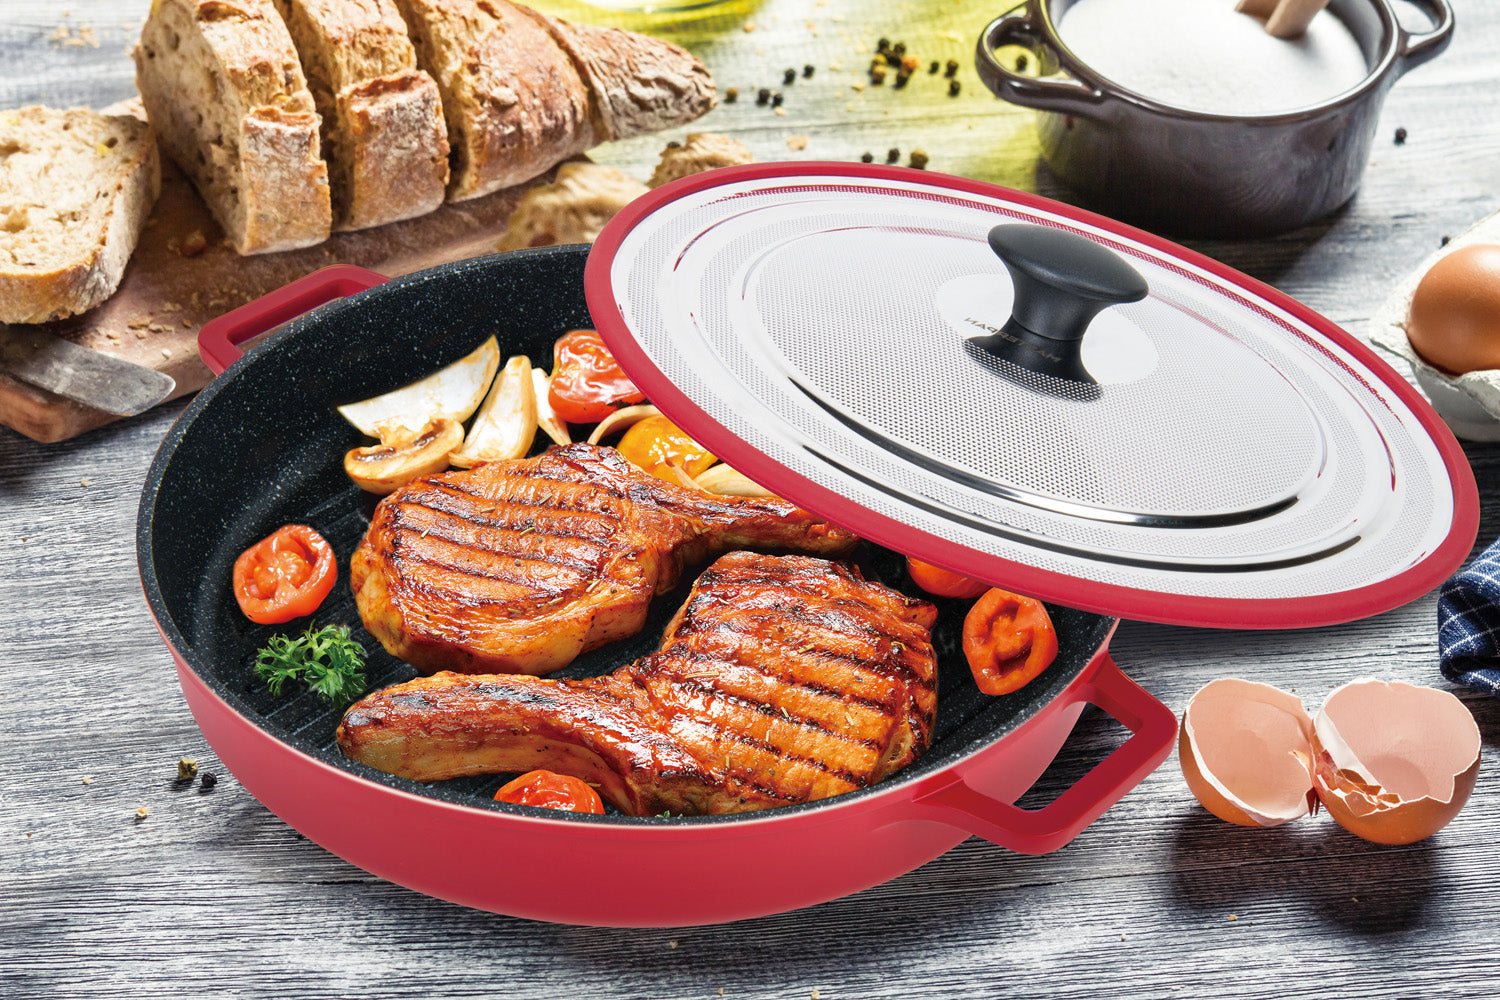 MasterPan Black Cast Aluminum 17 in Burner Grill Pan with Silicone Grips